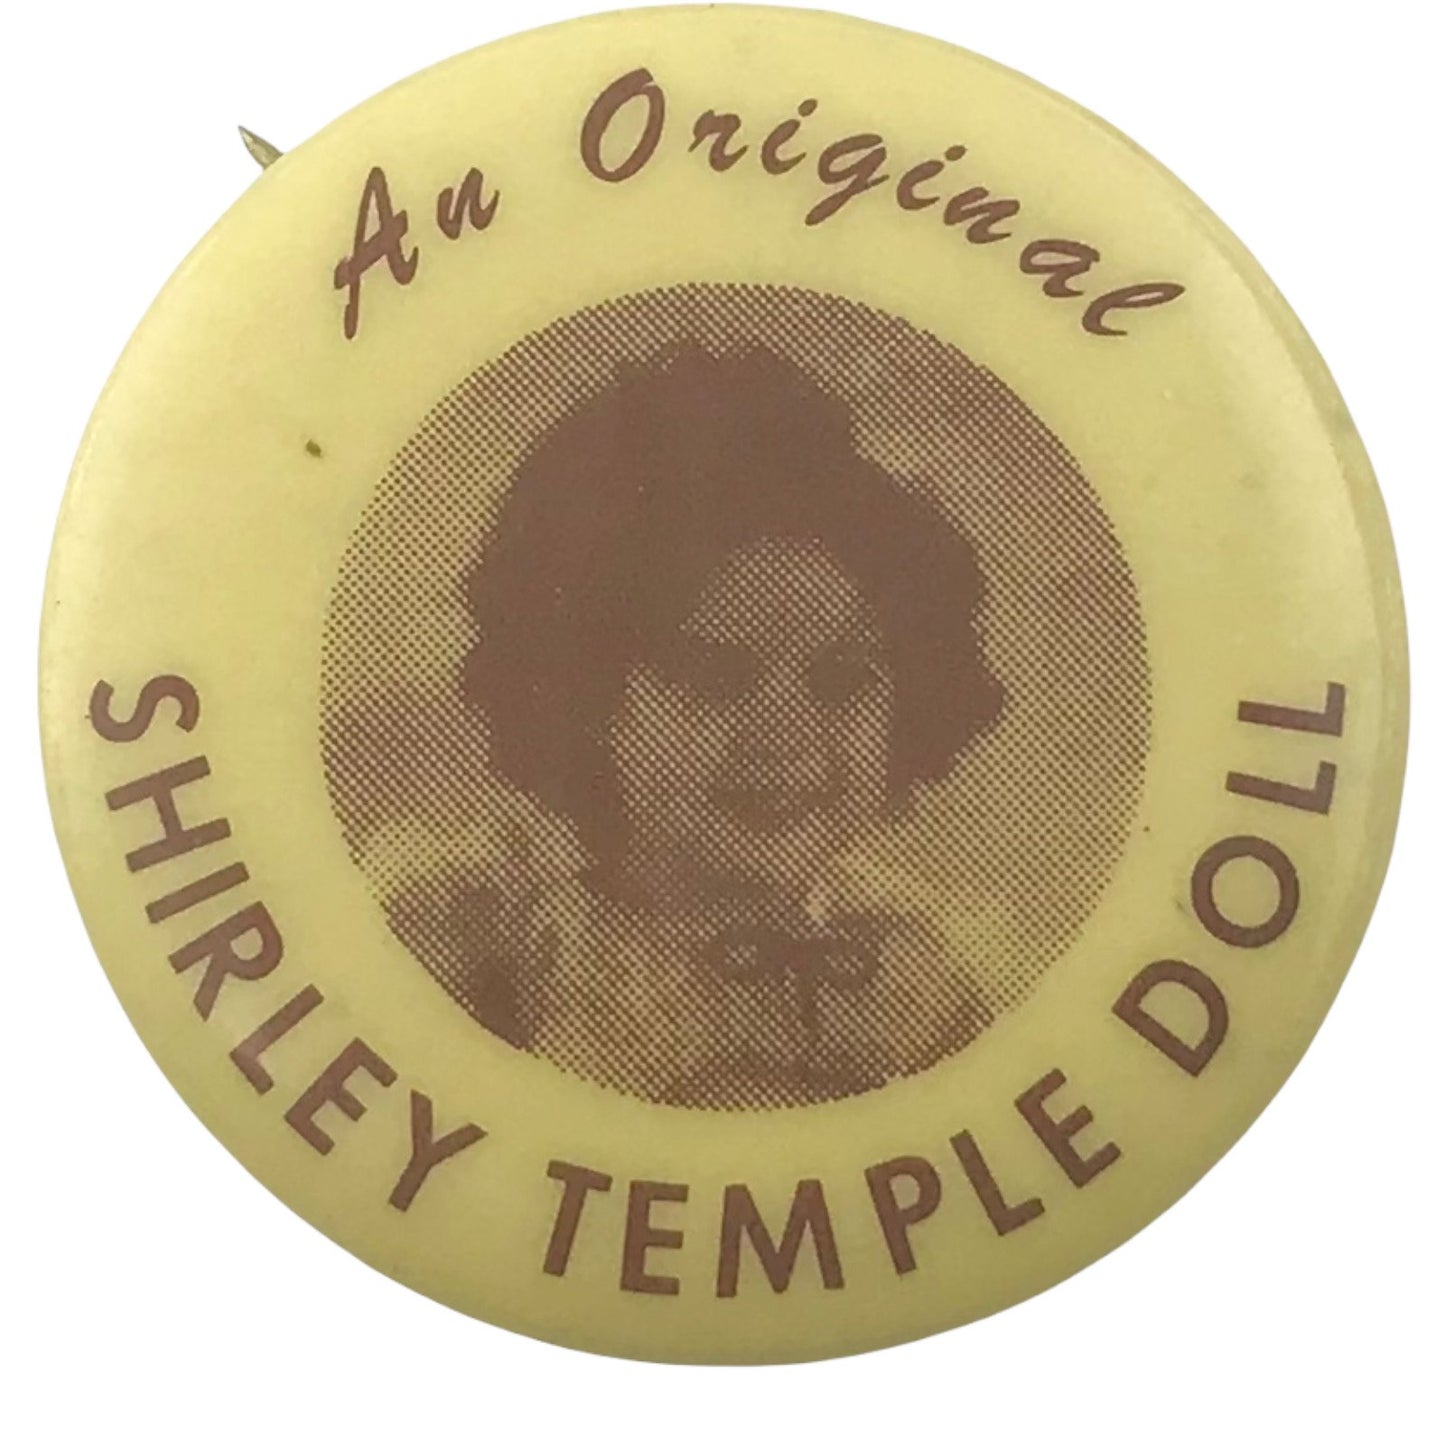 An Original Shirley Temple Doll 1 Inch Yellow Vintage Pinback Button